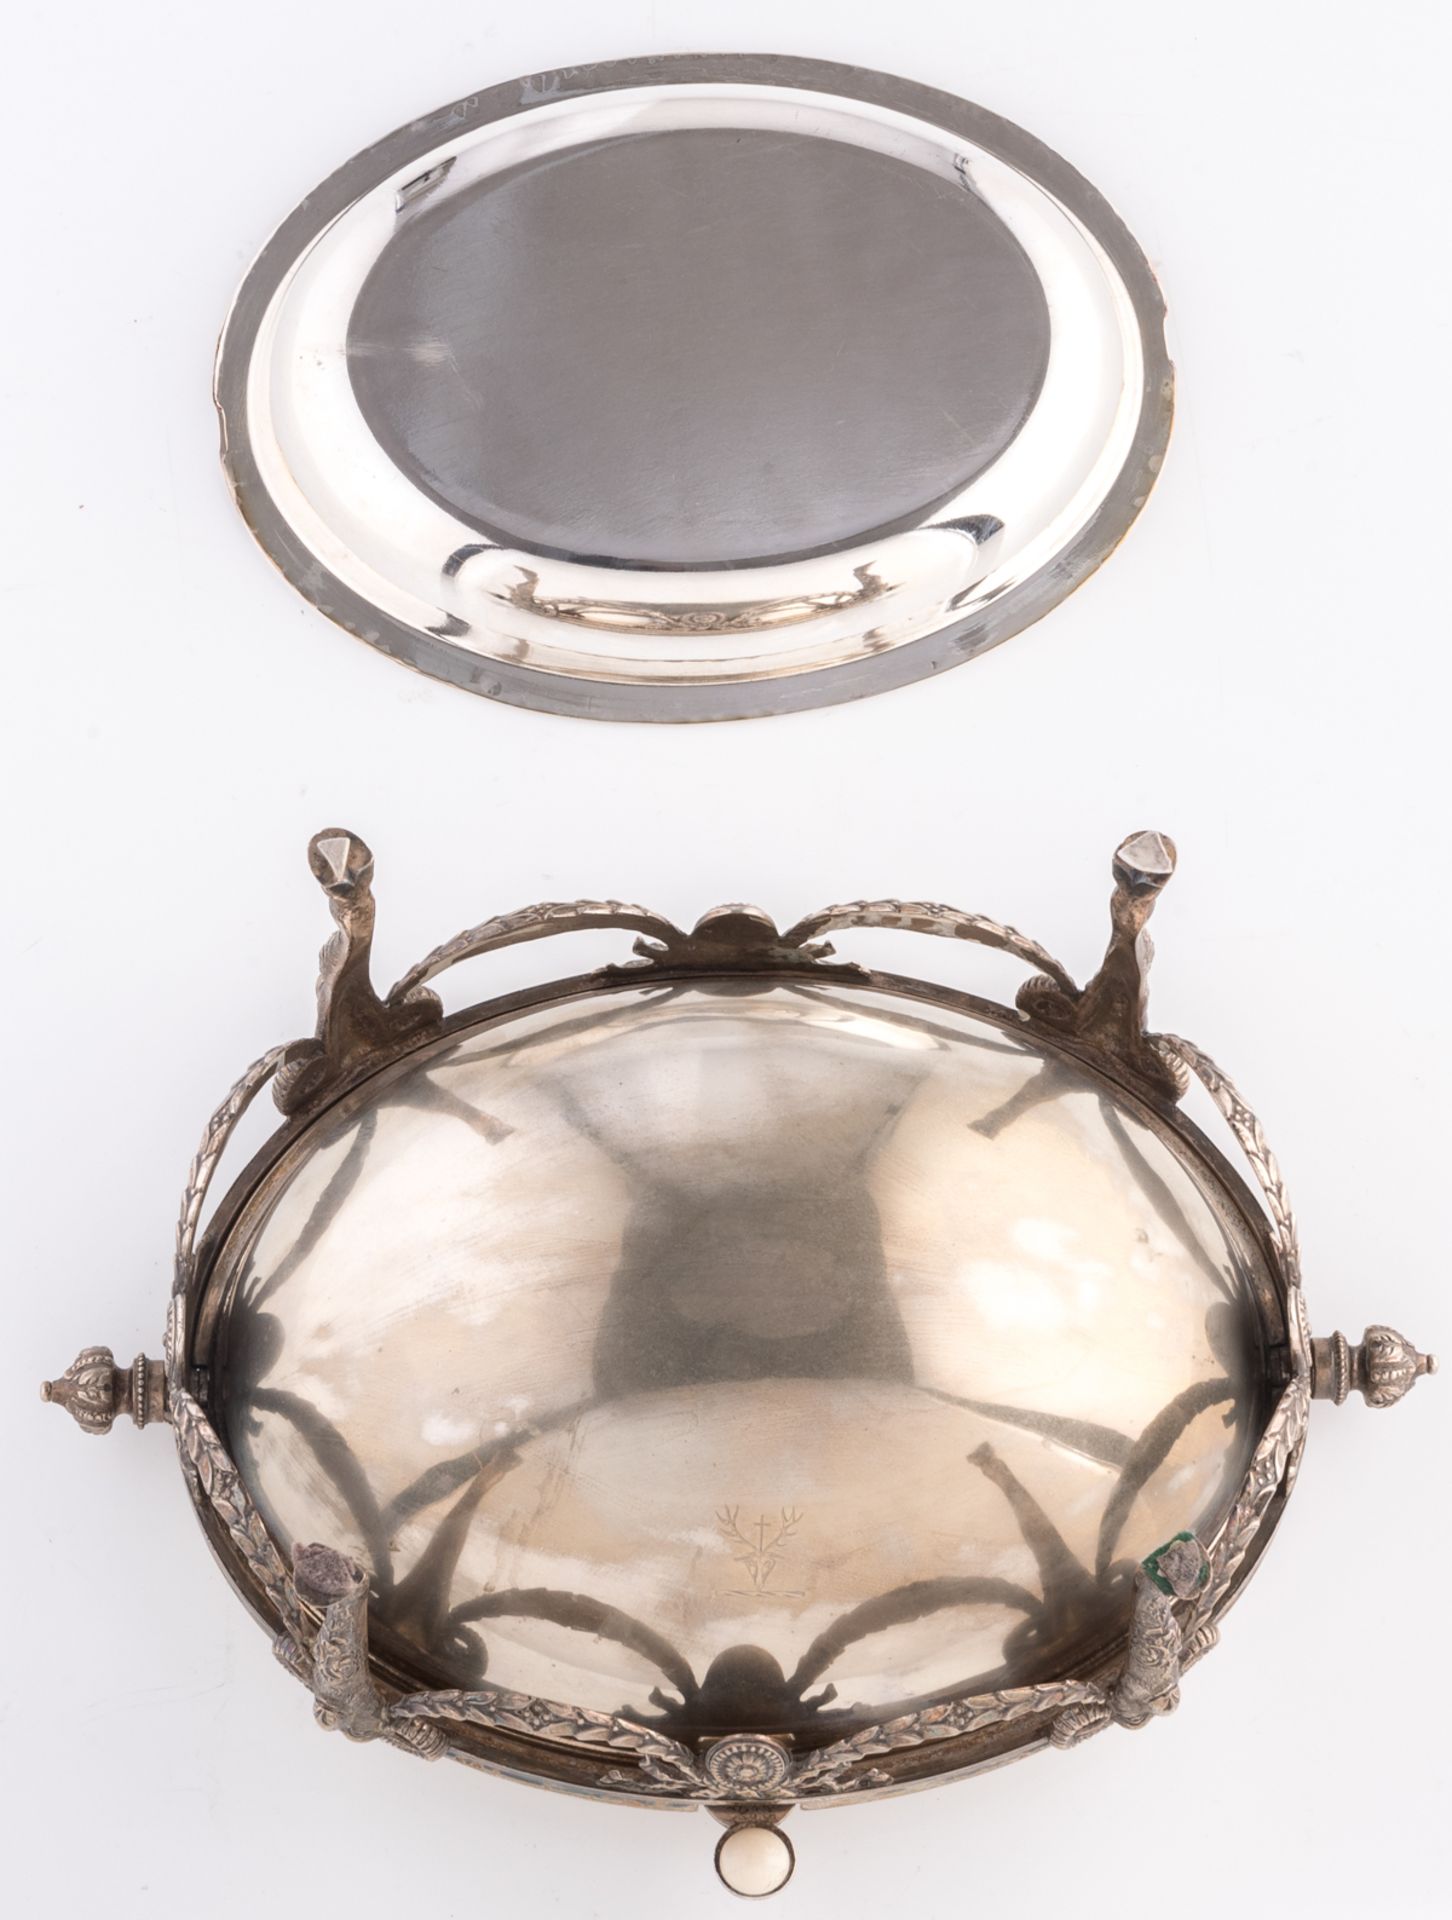 An English silver plated neoclassical covered caviar server with a bone handle, H 25 - W 38 - D 24 c - Bild 9 aus 10